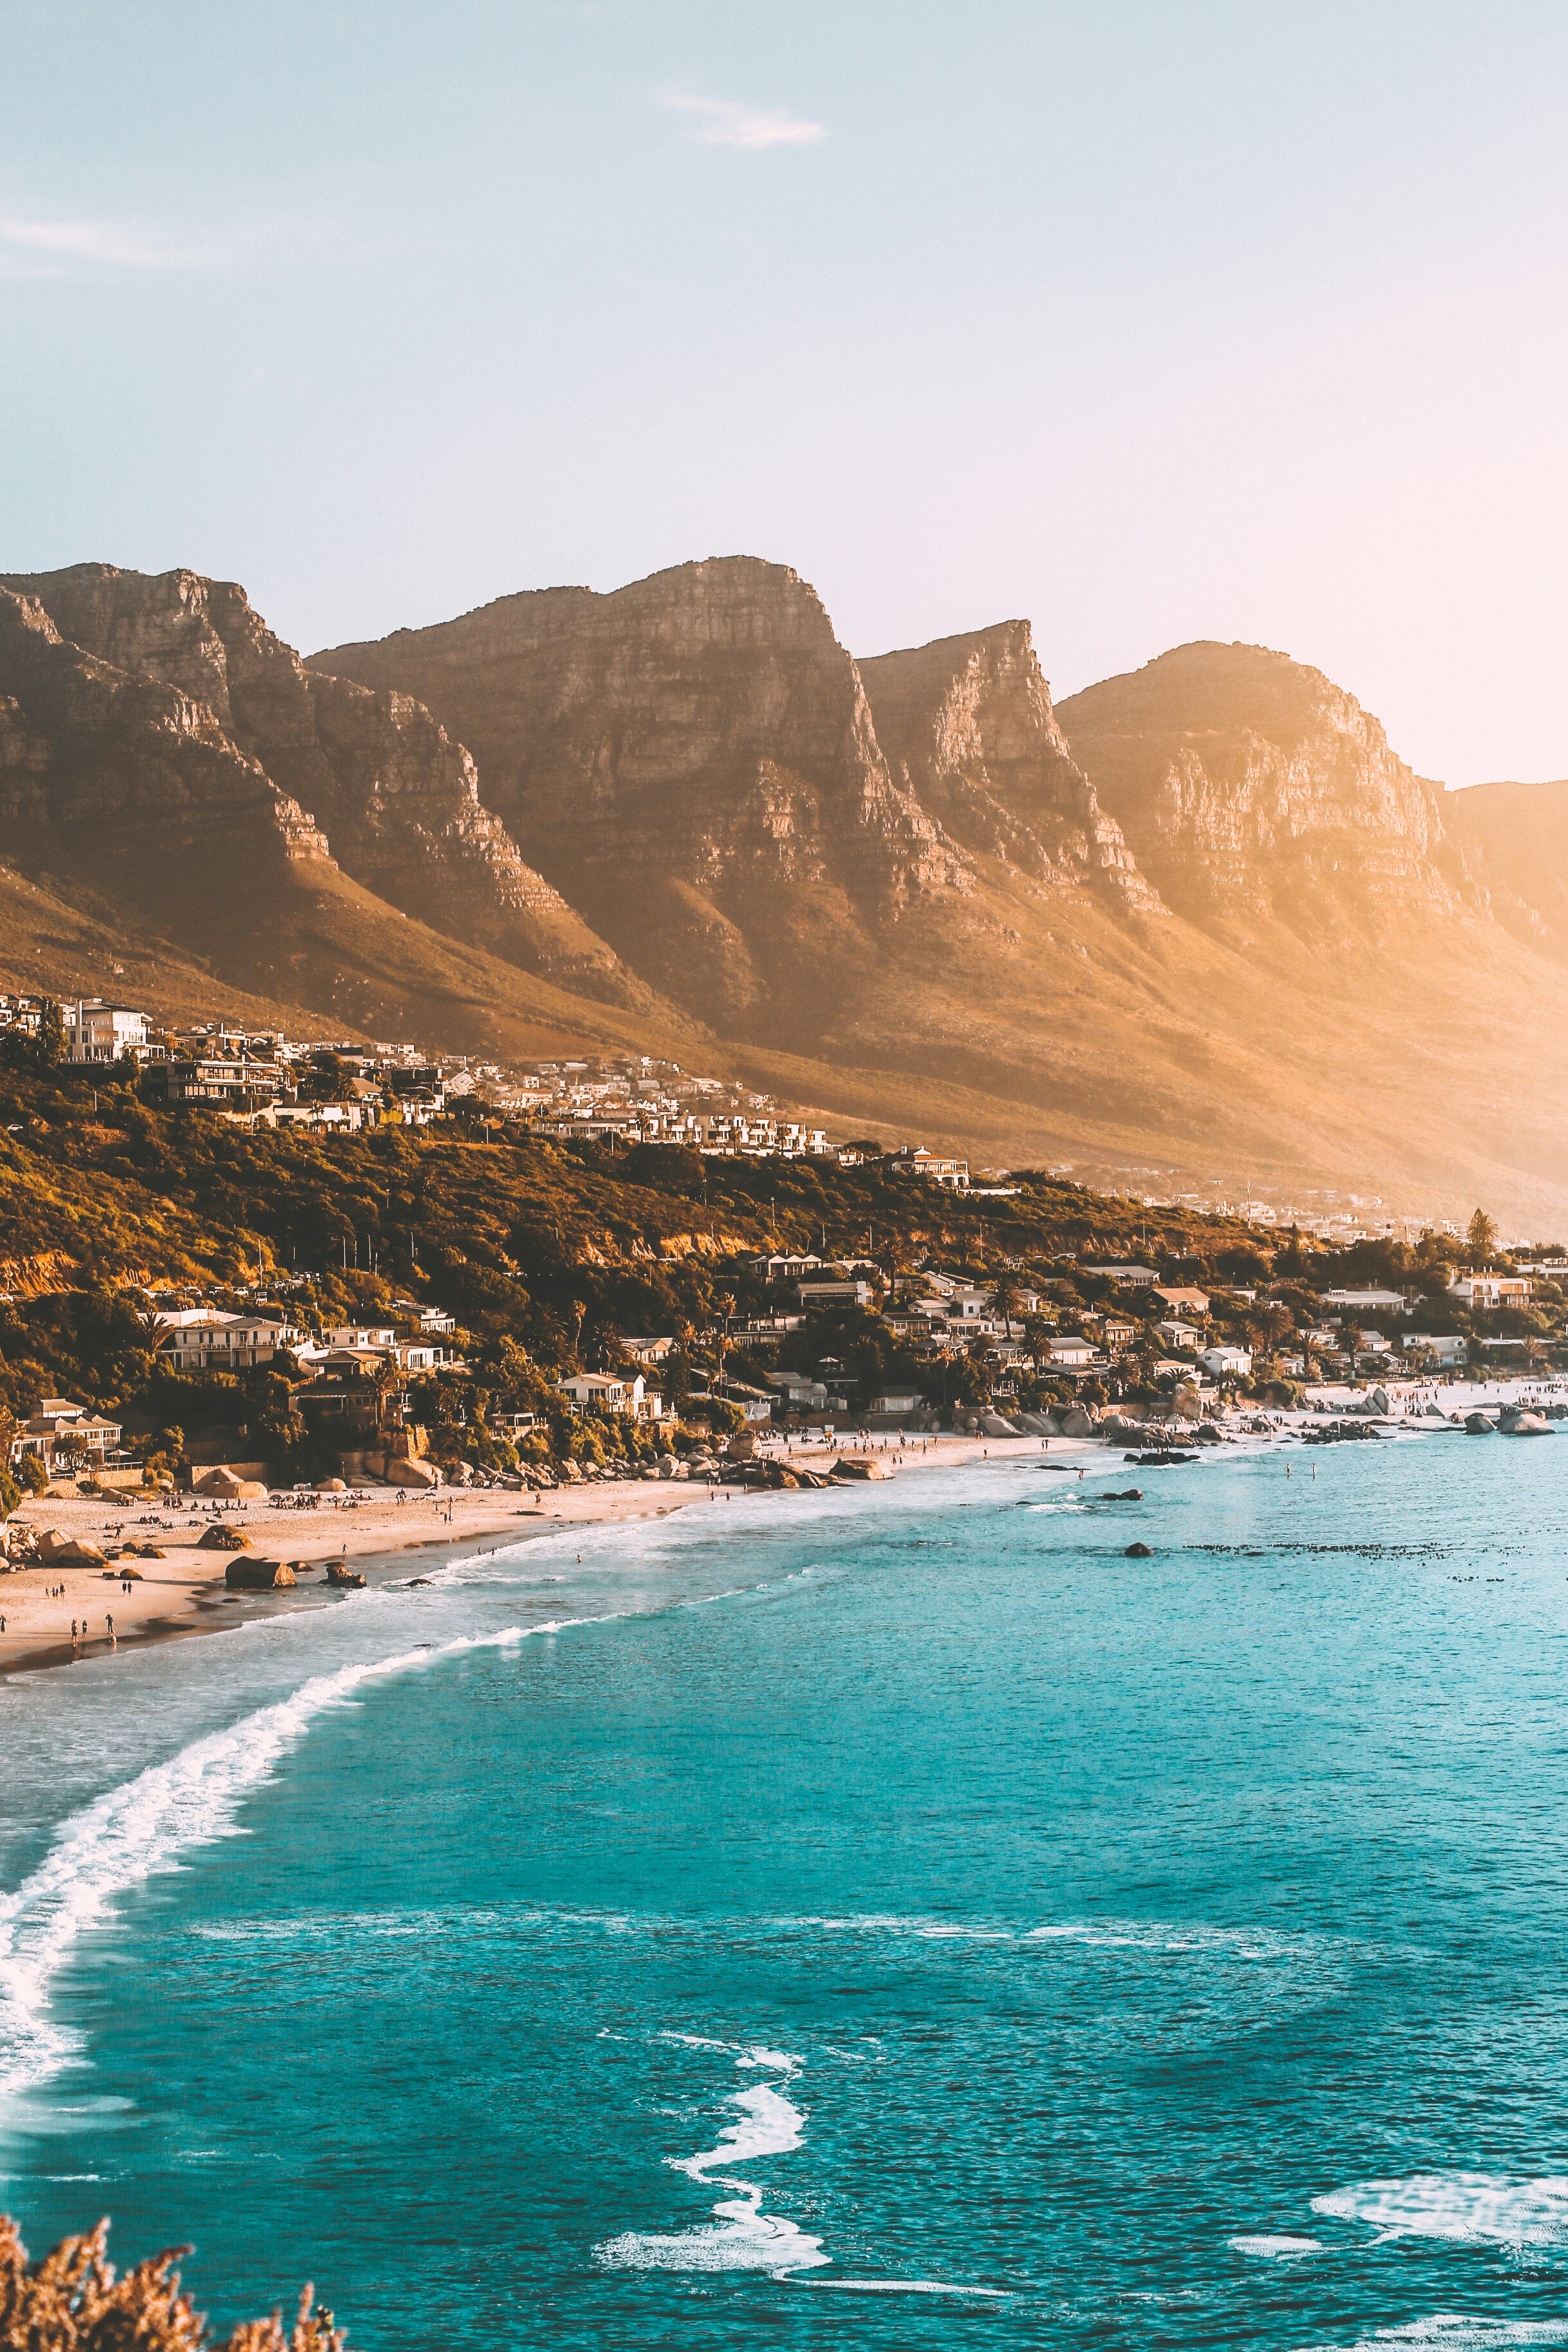 South Africa Travel Guide For First-Time Travellers